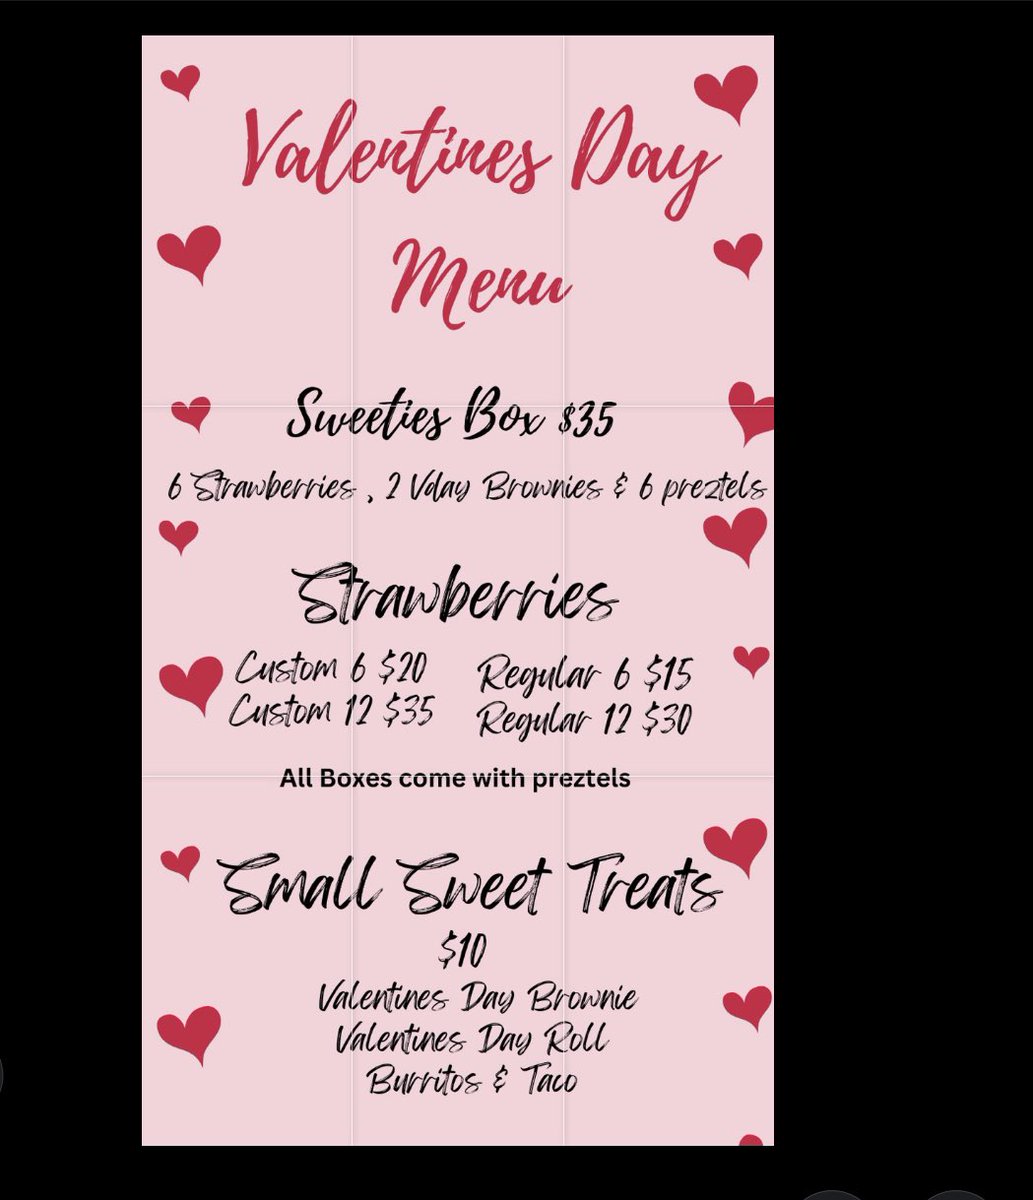 Valentines Day Menu is officially here 💕 Orders are being accepted until Feb.10 @ 5pm! No exceptions‼️ 
#CSU23 #CSU24 #CSU25 #CSU26